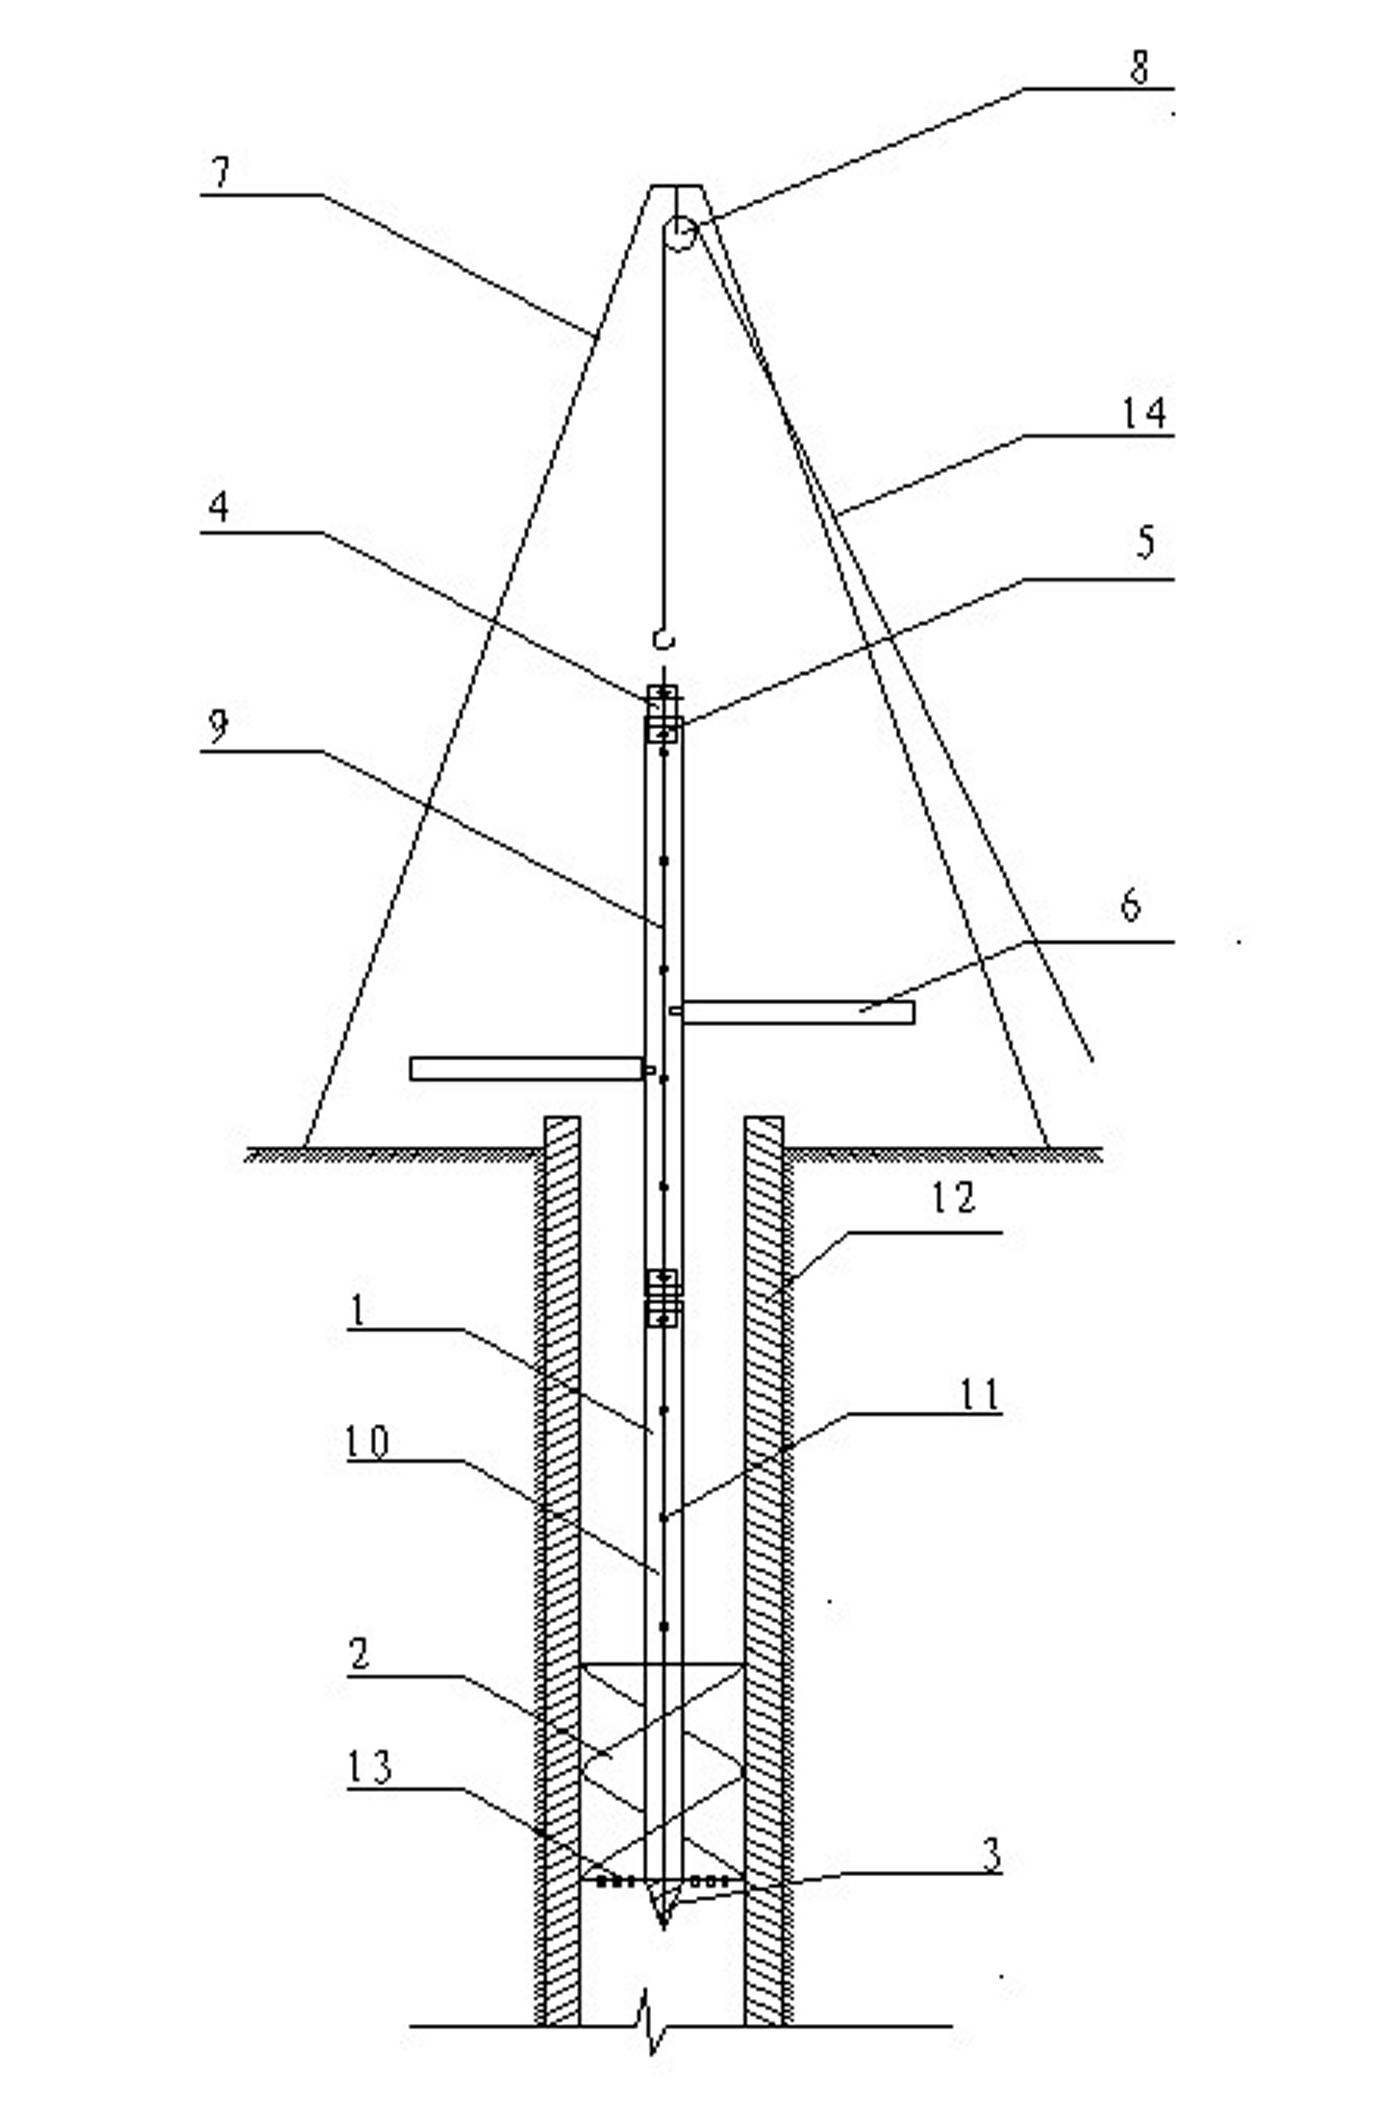 Simple manual spiral earth fetching device for reinforcing pile core of pre-stressed pipe pile